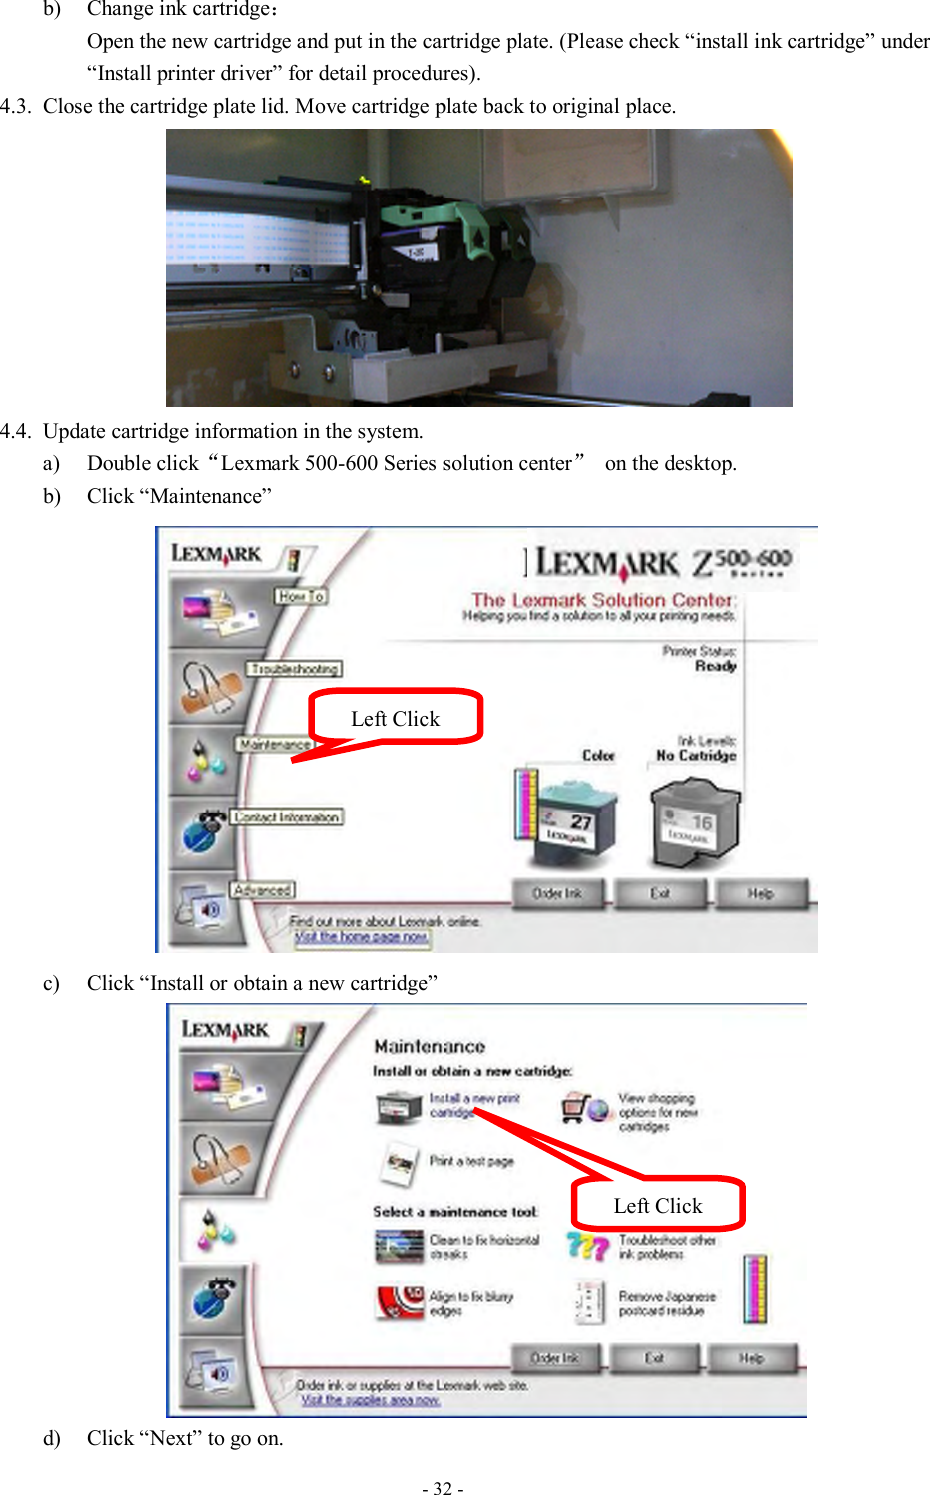  - 32 -  b) Change ink cartridge： Open the new cartridge and put in the cartridge plate. (Please check “install ink cartridge” under “Install printer driver” for detail procedures).   4.3. Close the cartridge plate lid. Move cartridge plate back to original place.    4.4. Update cartridge information in the system. a) Double click“Lexmark 500-600 Series solution center”  on the desktop. b) Click “Maintenance”    c) Click “Install or obtain a new cartridge”  d) Click “Next” to go on. Left Click Left Click 